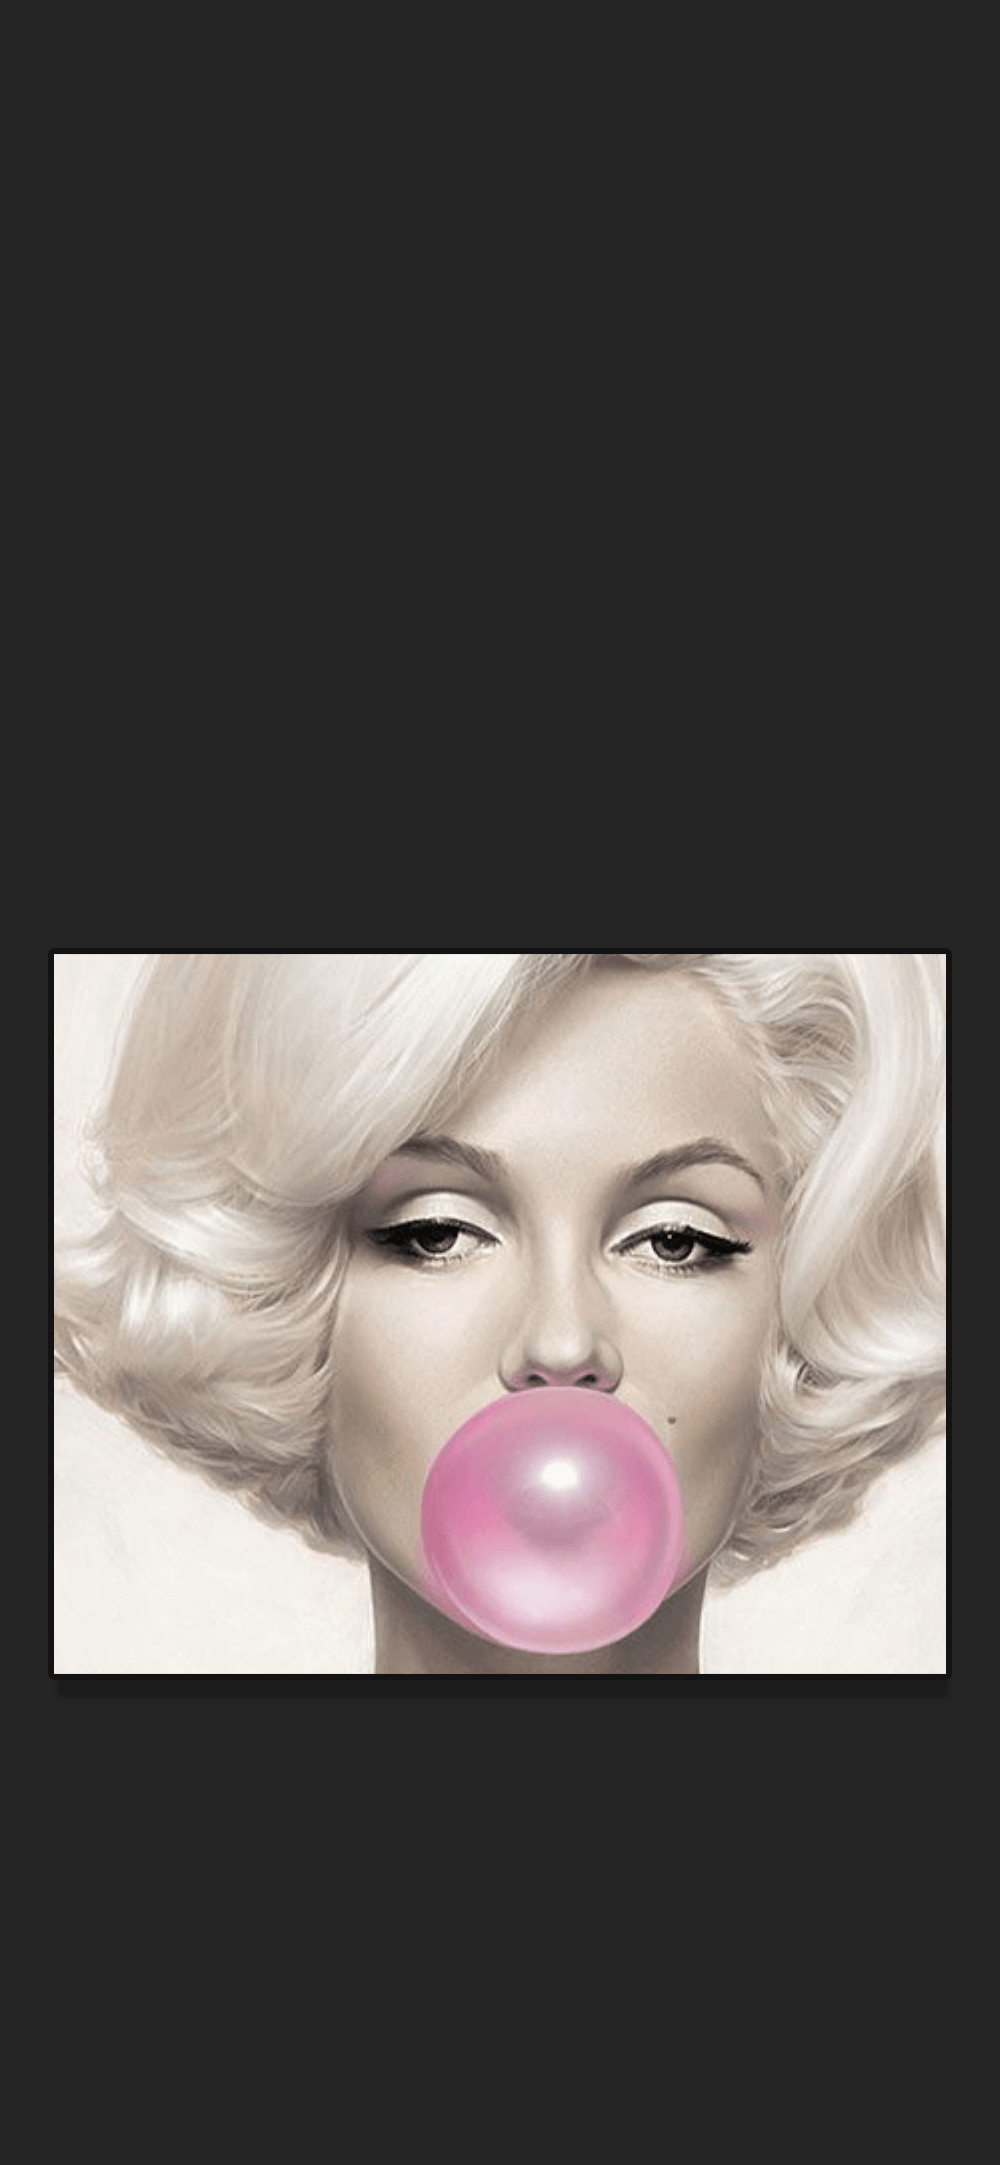 Wallpaper, Background, HD, iPhone, Android, Minimal, Marilyn